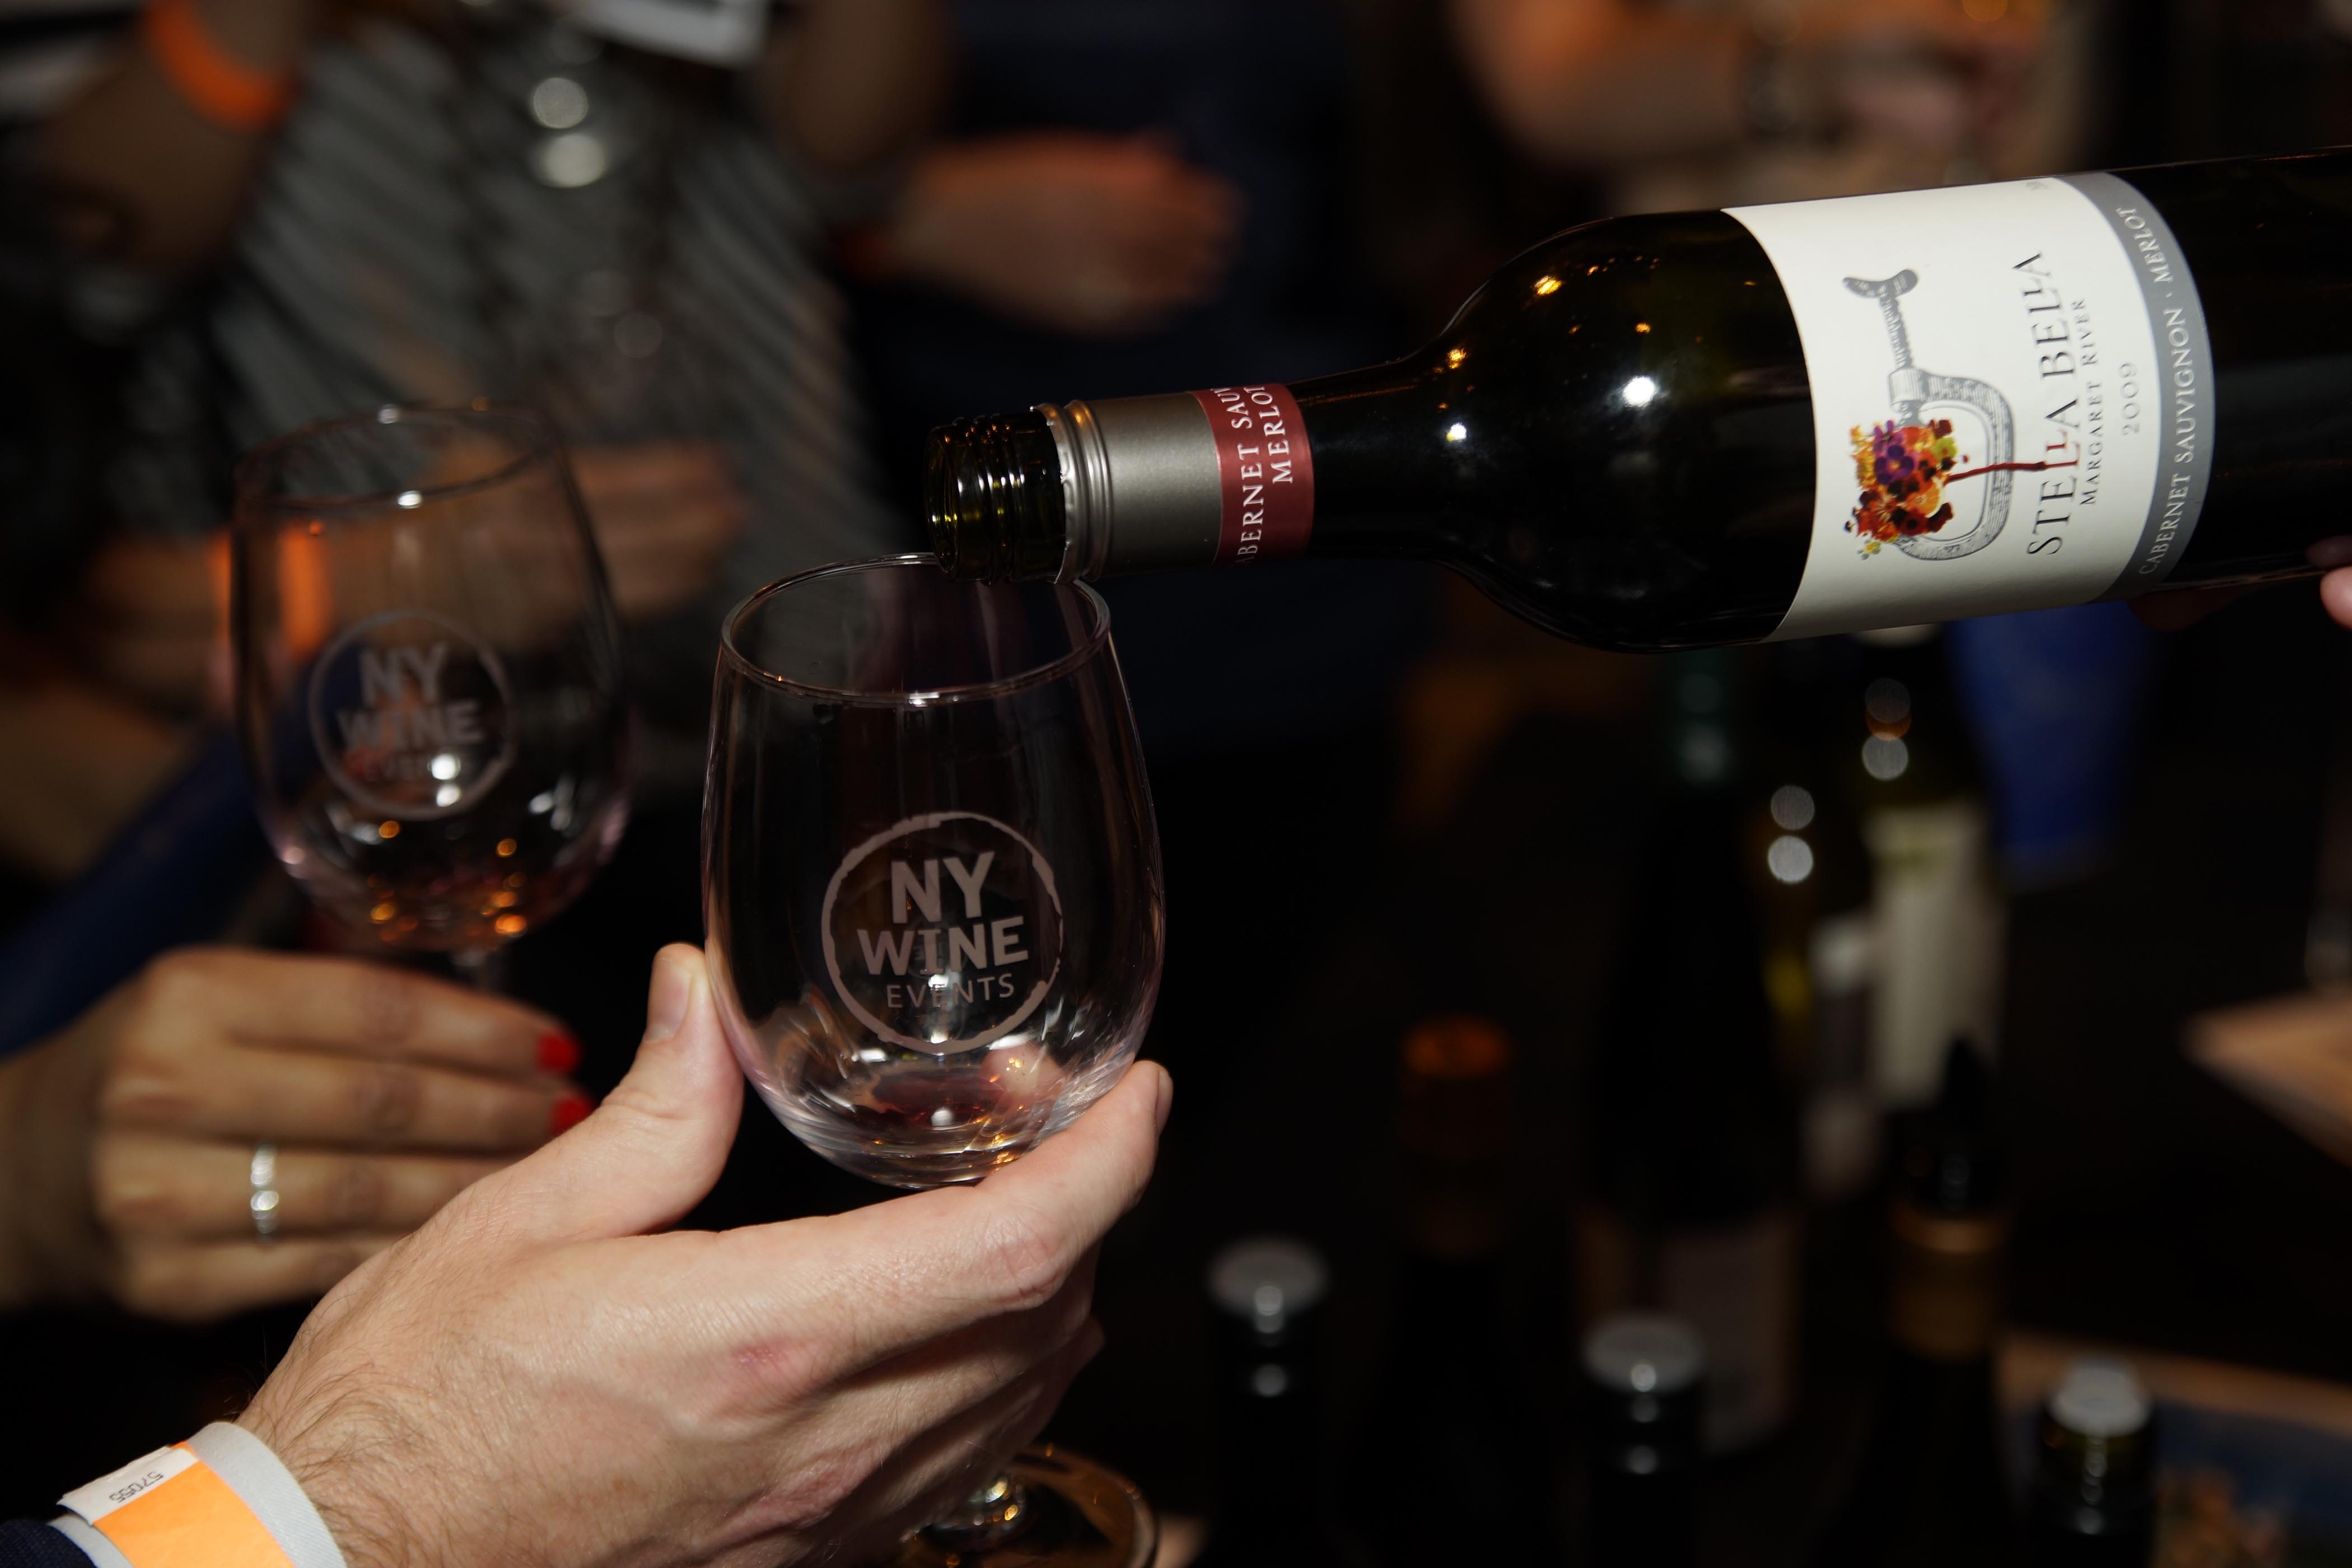 Taste an array of quality wines at the NYC Spring Wine Festival at the Broad Street Ballroom, Saturday, May 9, 2015.